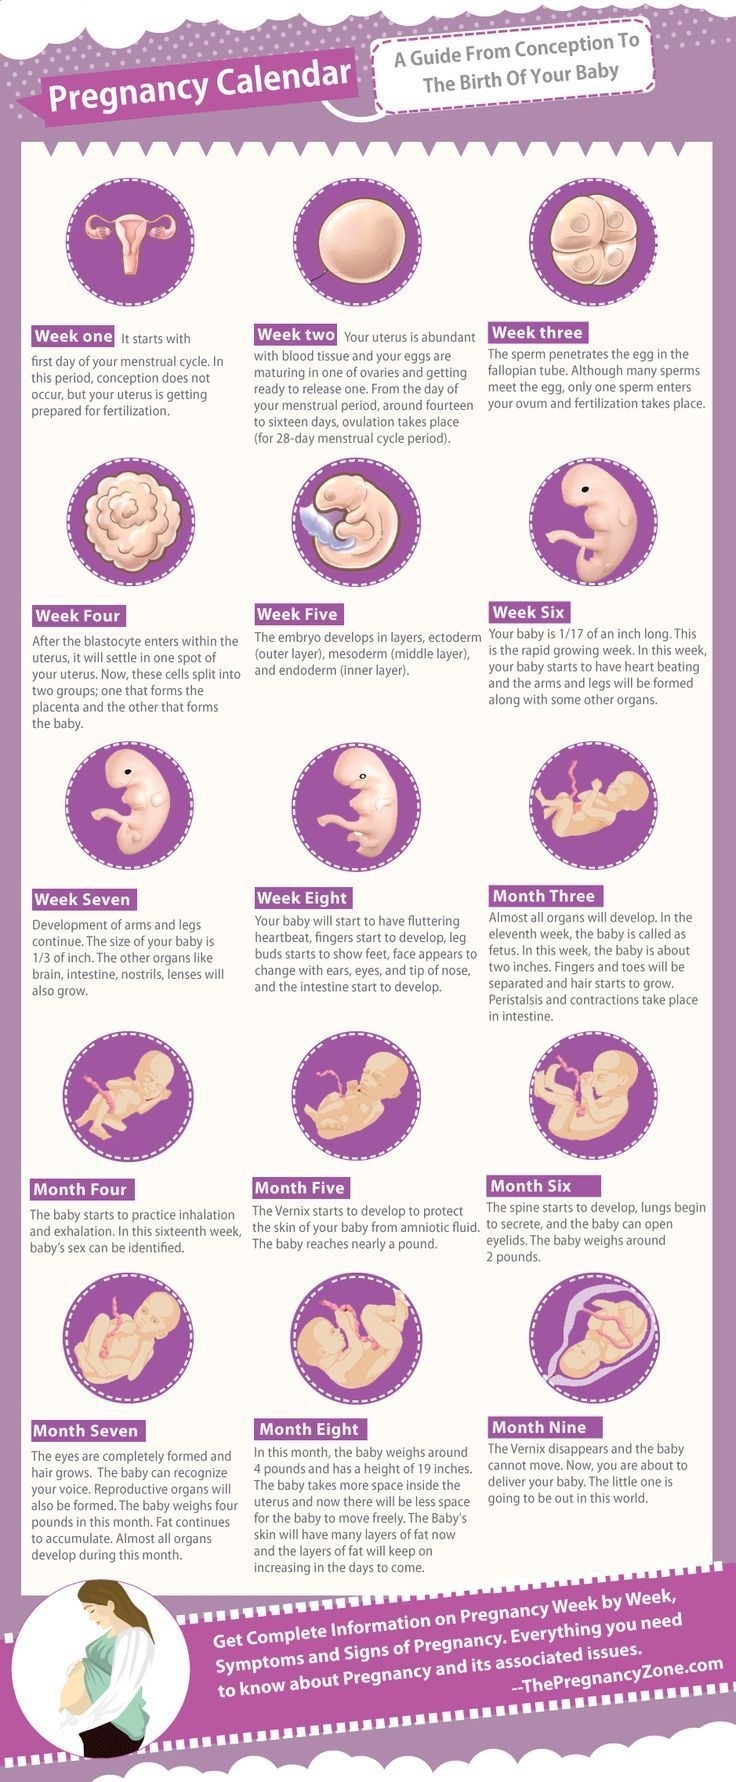 A Guide From Conception To The Birth Of Your Baby! #pregnancy  Pregnancy Timeline Week By Week